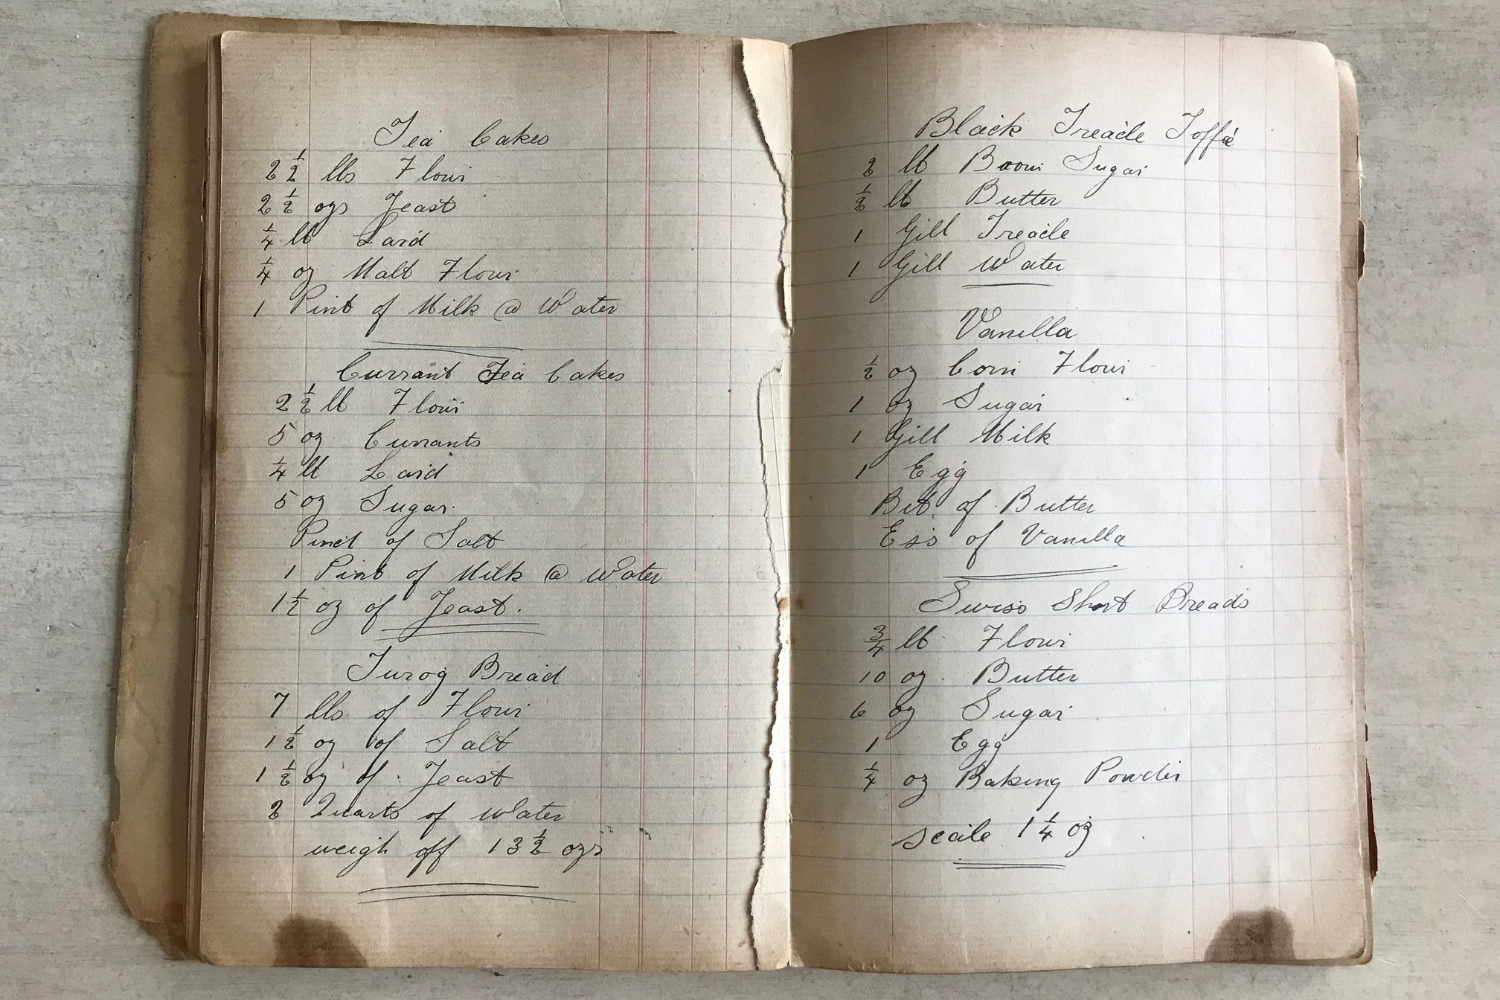 A handwritten recipe book lays open flat on a white table, showing both left and right pages of the book. The cursive text is written in thin black ink. On the lefthand page, from top to bottom, are recipes for tea cakes, currant tea cakes and turog bread. On the righthand page, from top to bottom, are recipes for black treacle toffee, vanilla and Swiss short breads.